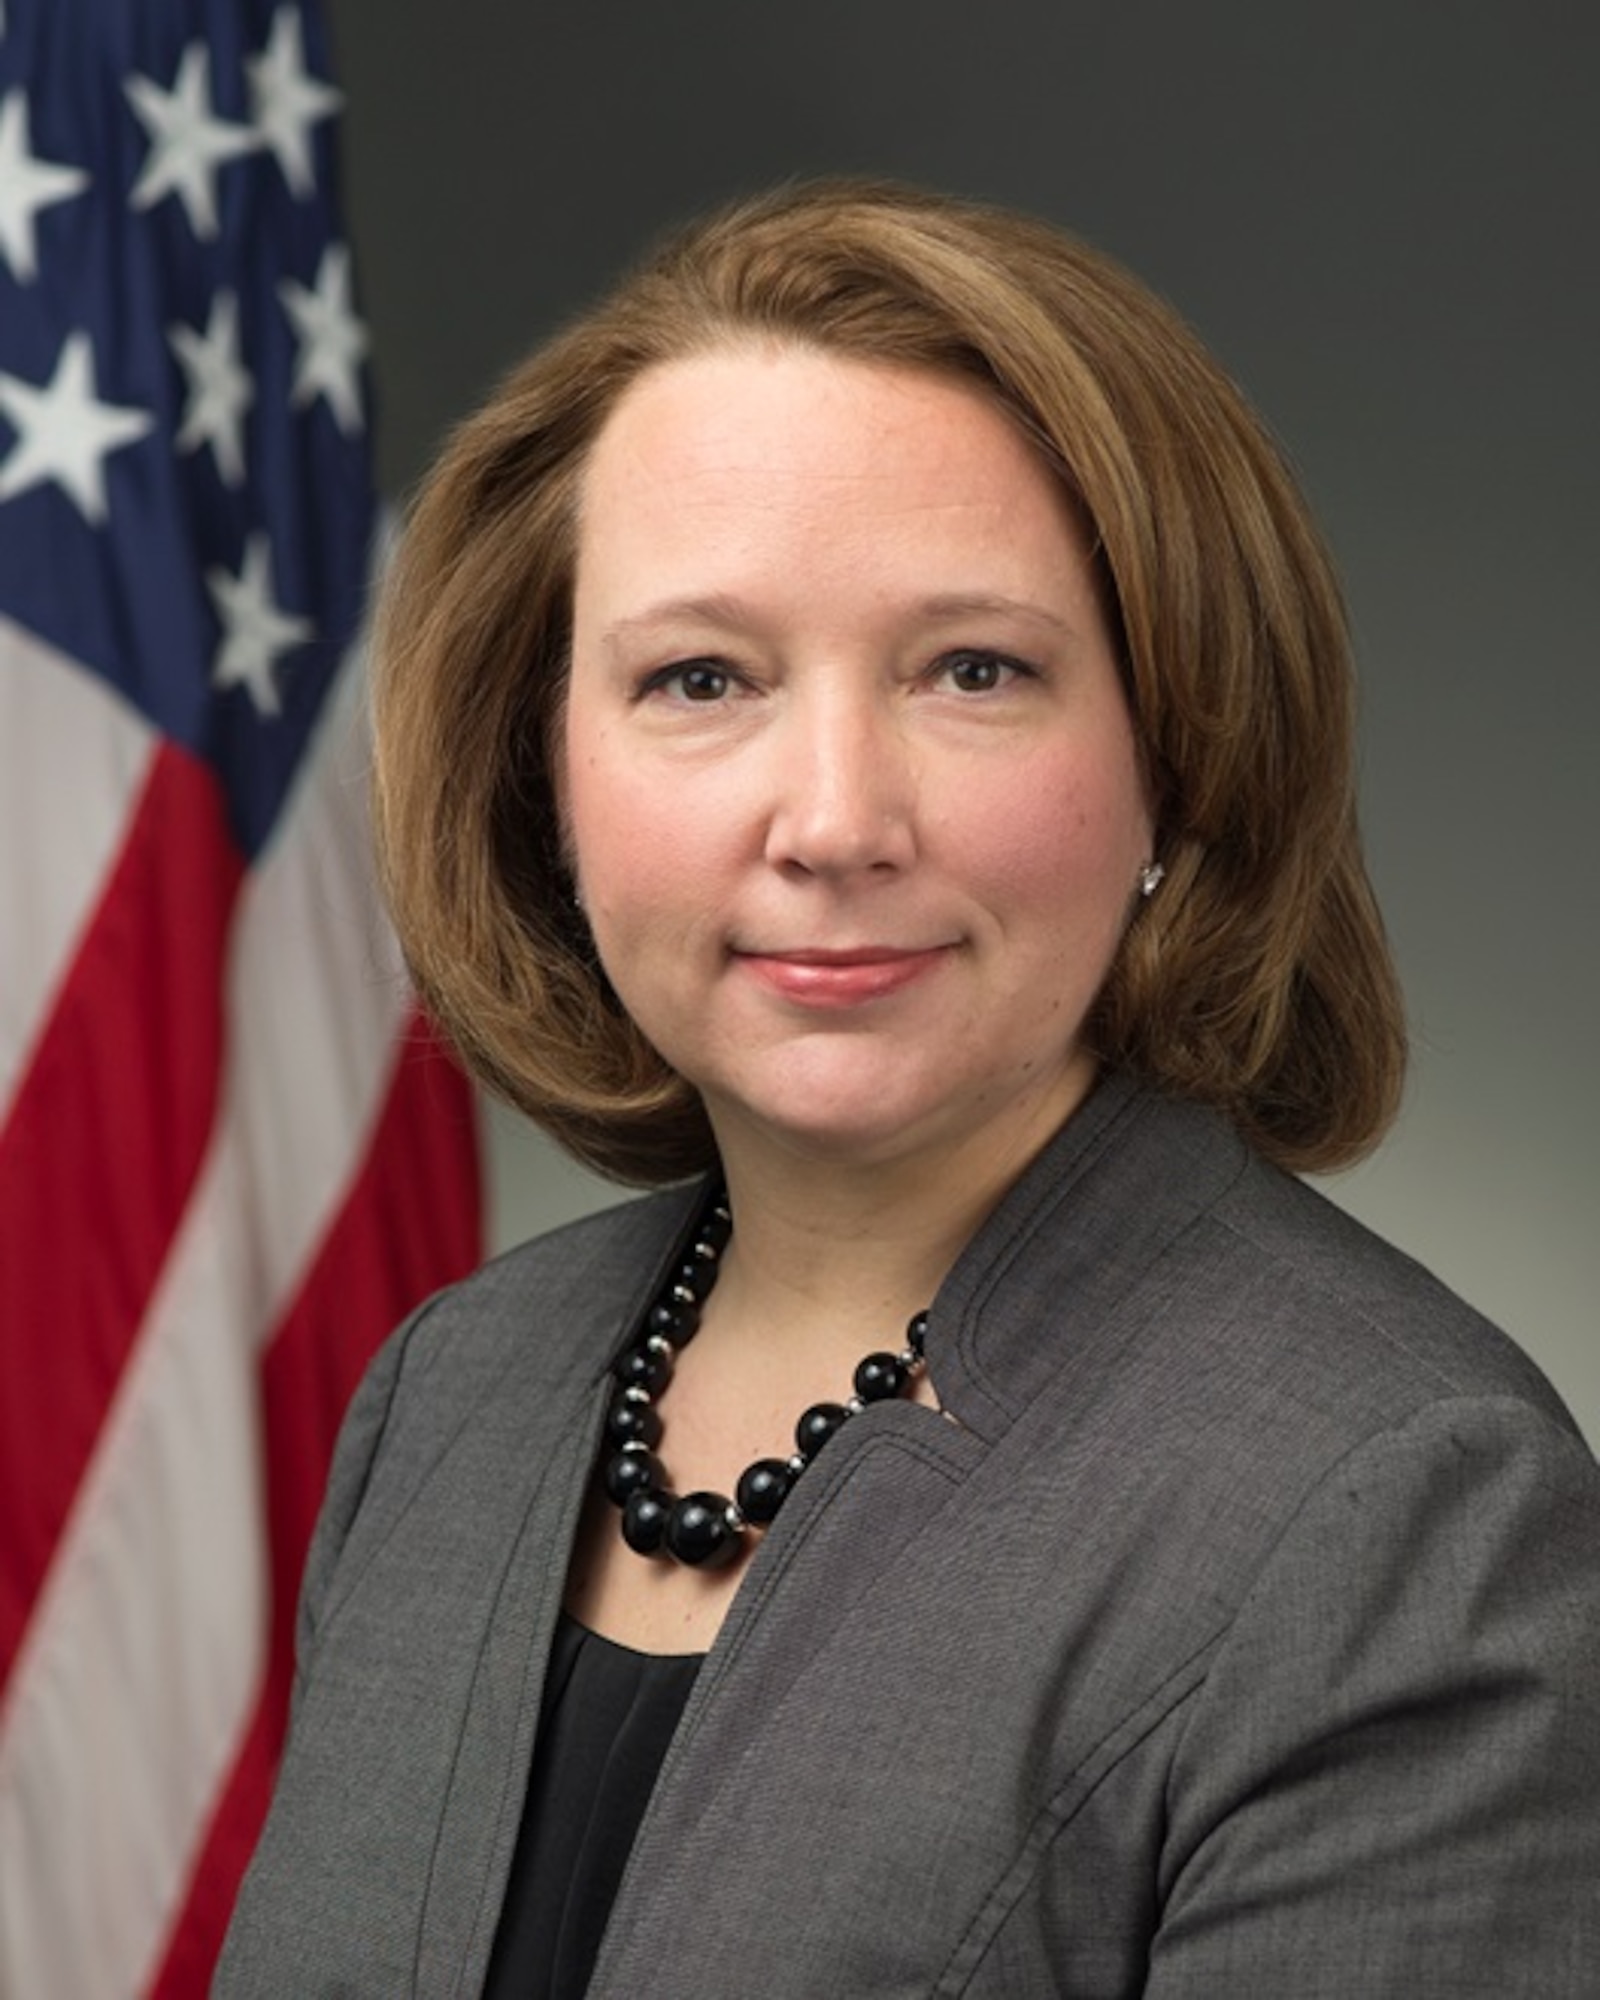 Ms. Jennifer Morgan will succeed Pamela Henson as AFRL’s director of financial management and comptroller on June 2, 2015. (U.S. Air Force photo)